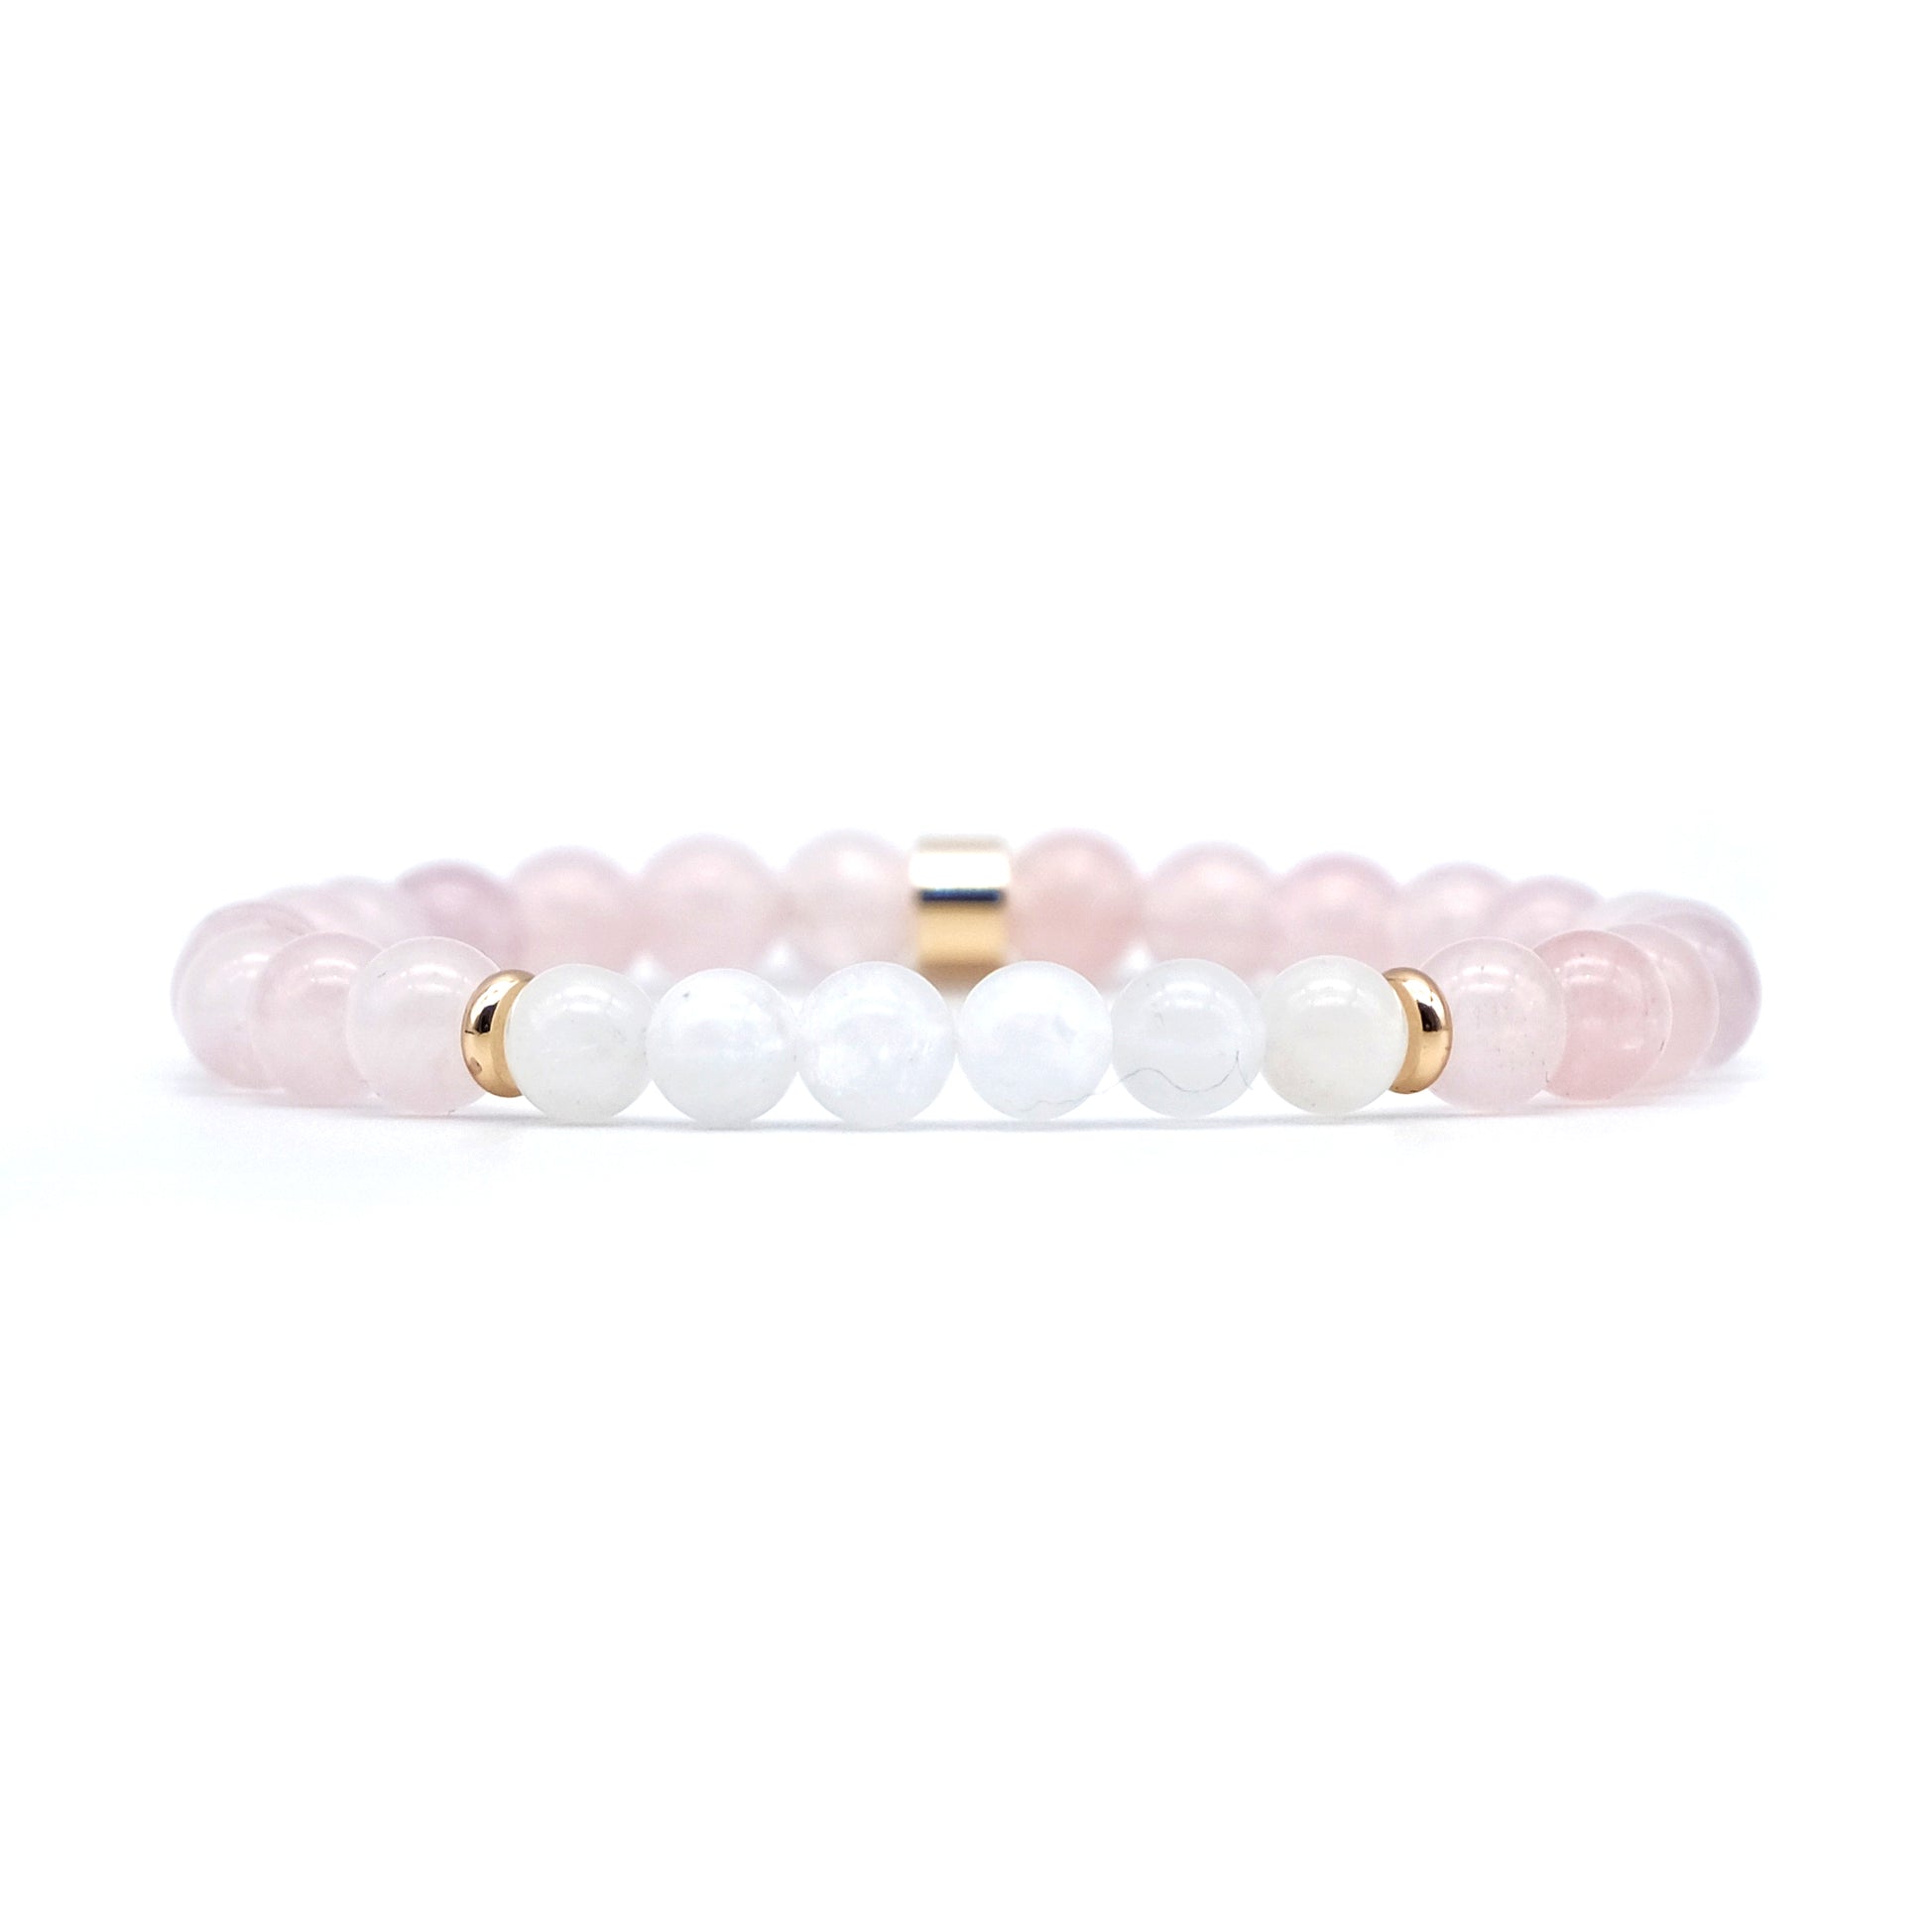 6mm Rose Quartz and Moonstone Bracelet with gold accessories